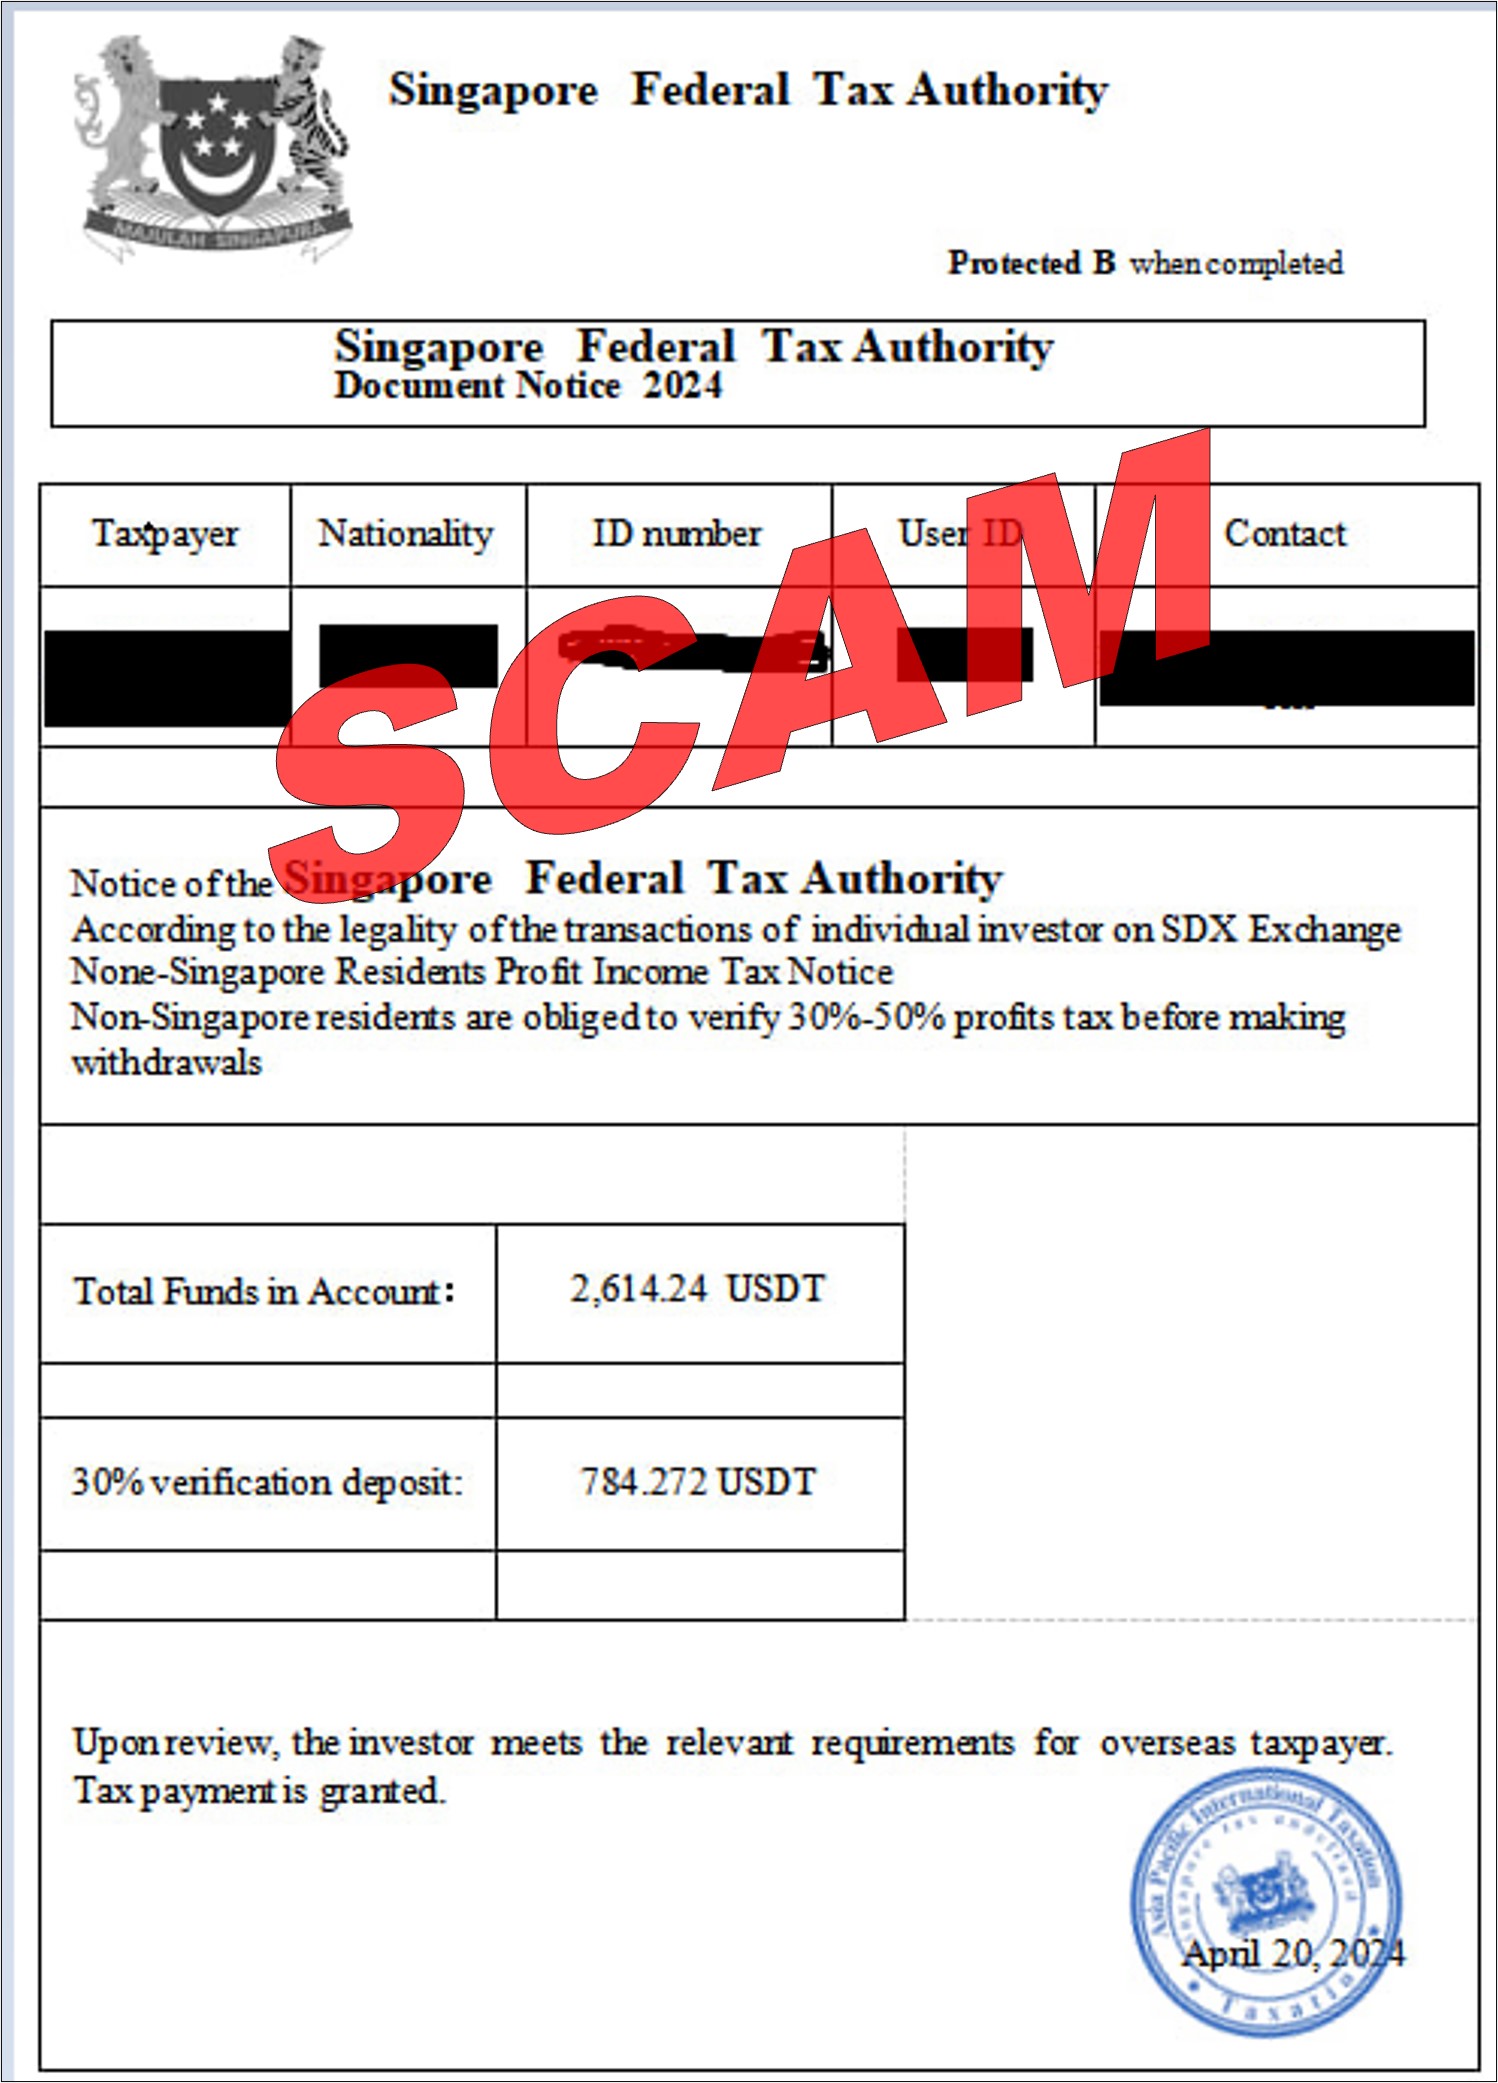 Screenshot of scam invoice from singapore federal tax authority for tax payment on cryptocurrency_23Apr24